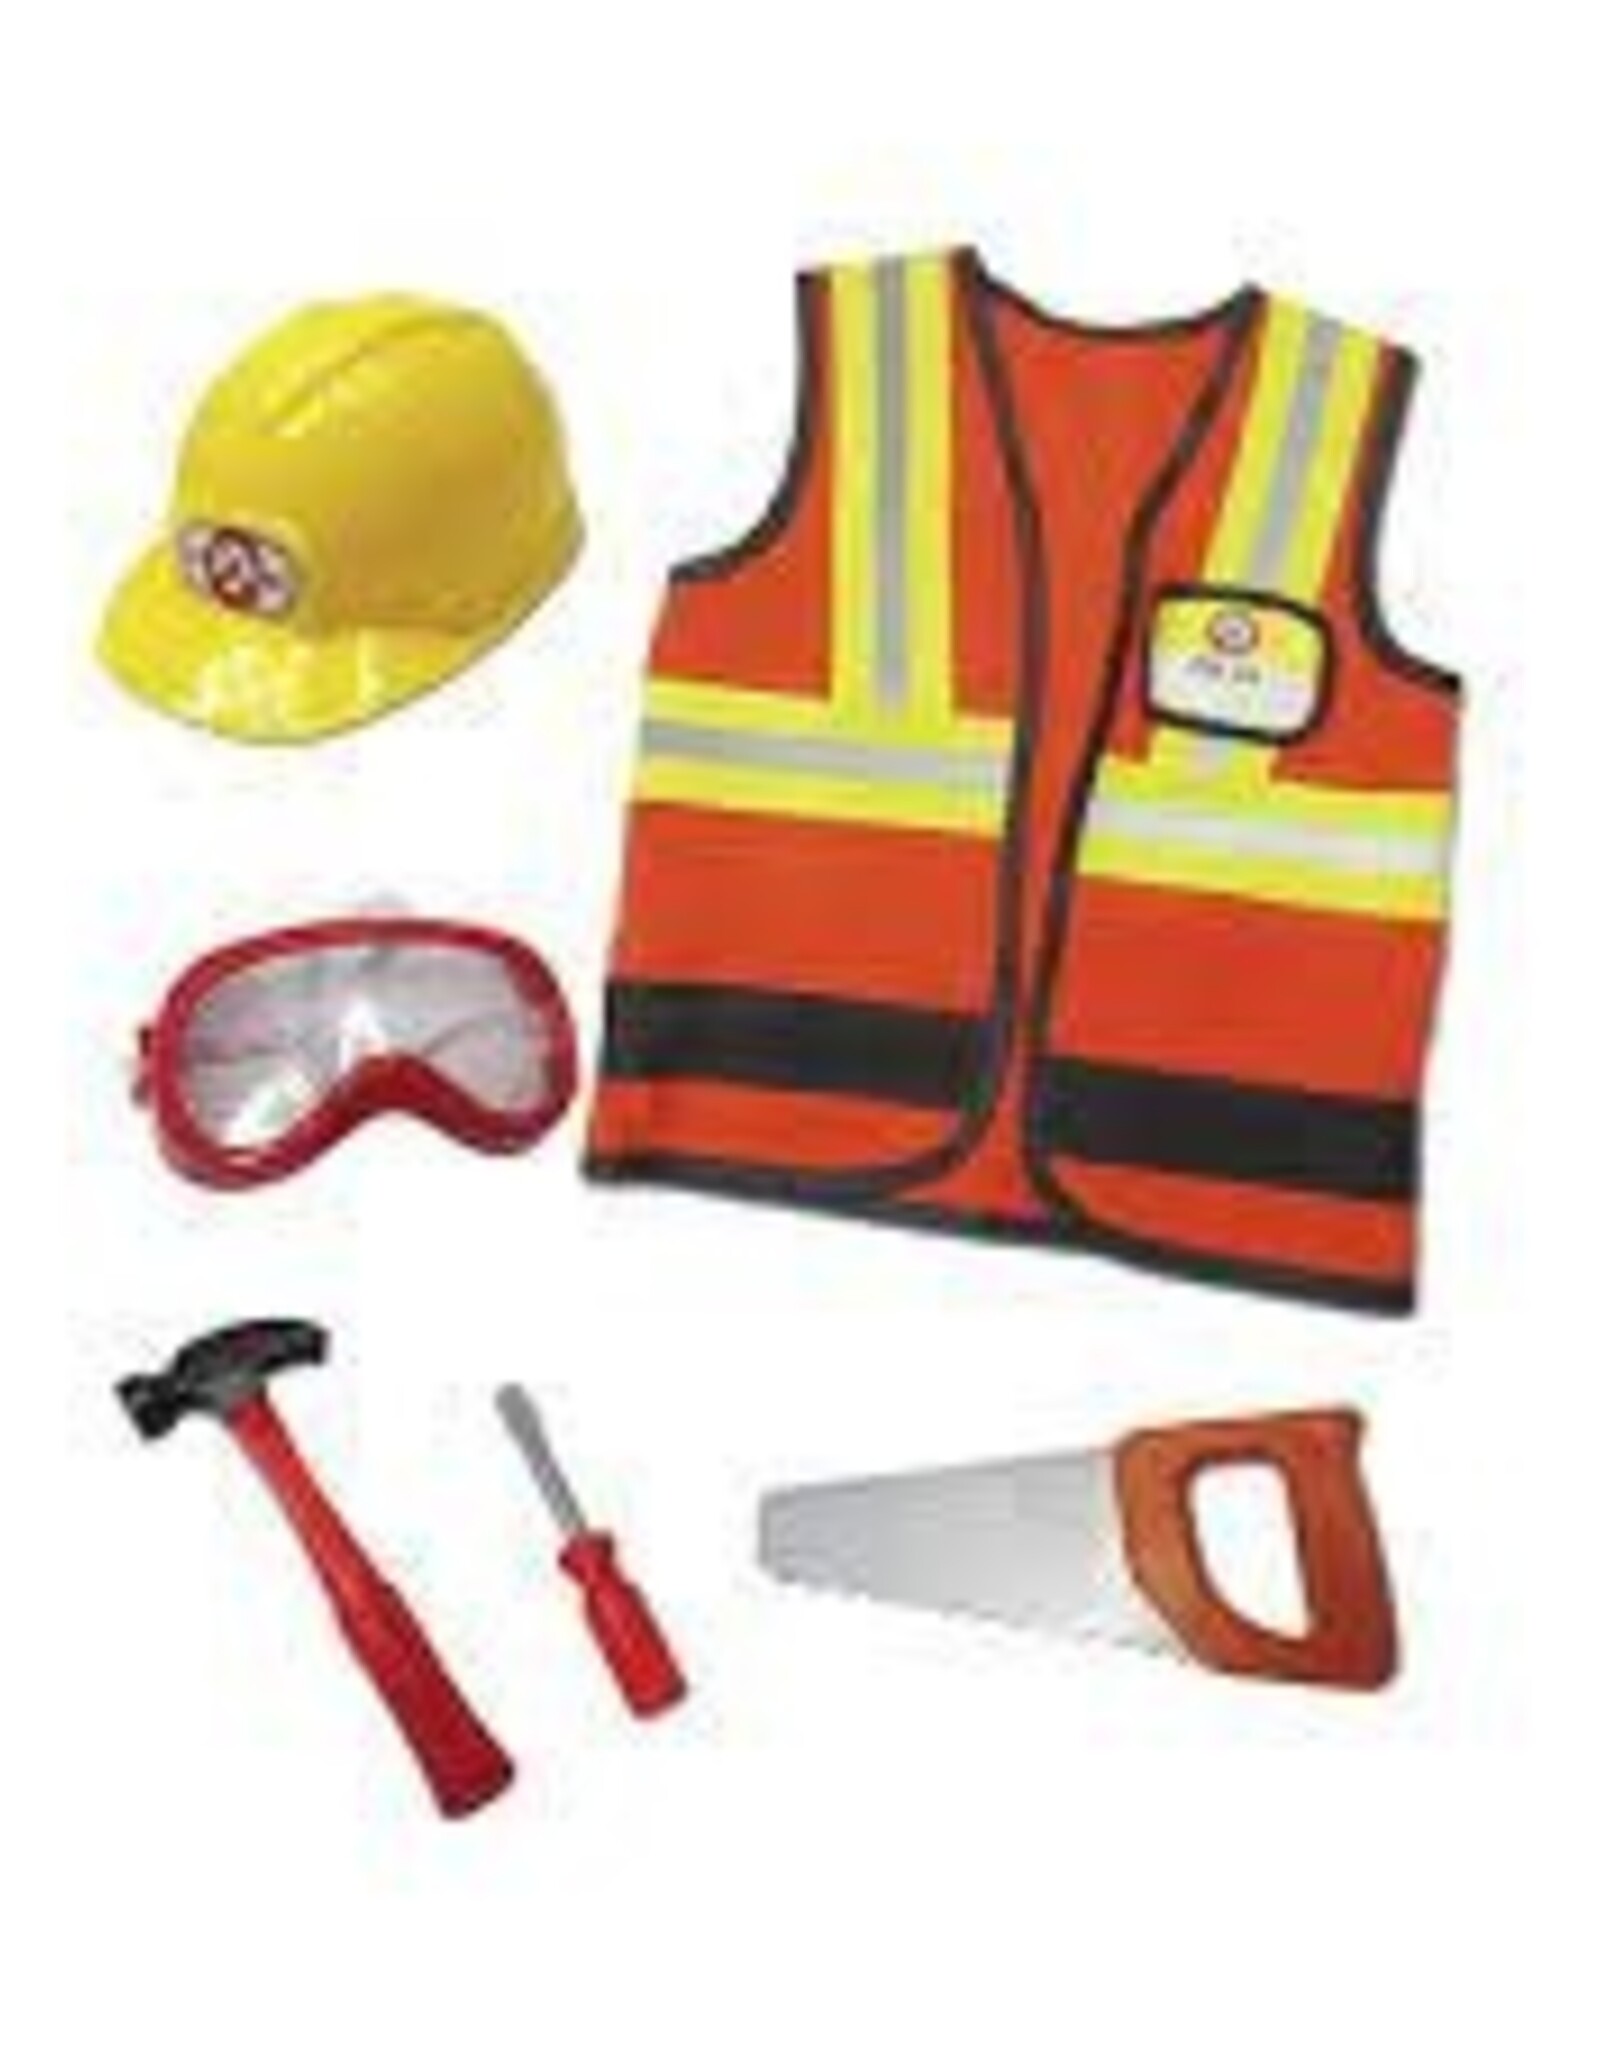 CREATIVE EDUCATION Construction Worker Set Includes 7 Accessories, Size 5-6